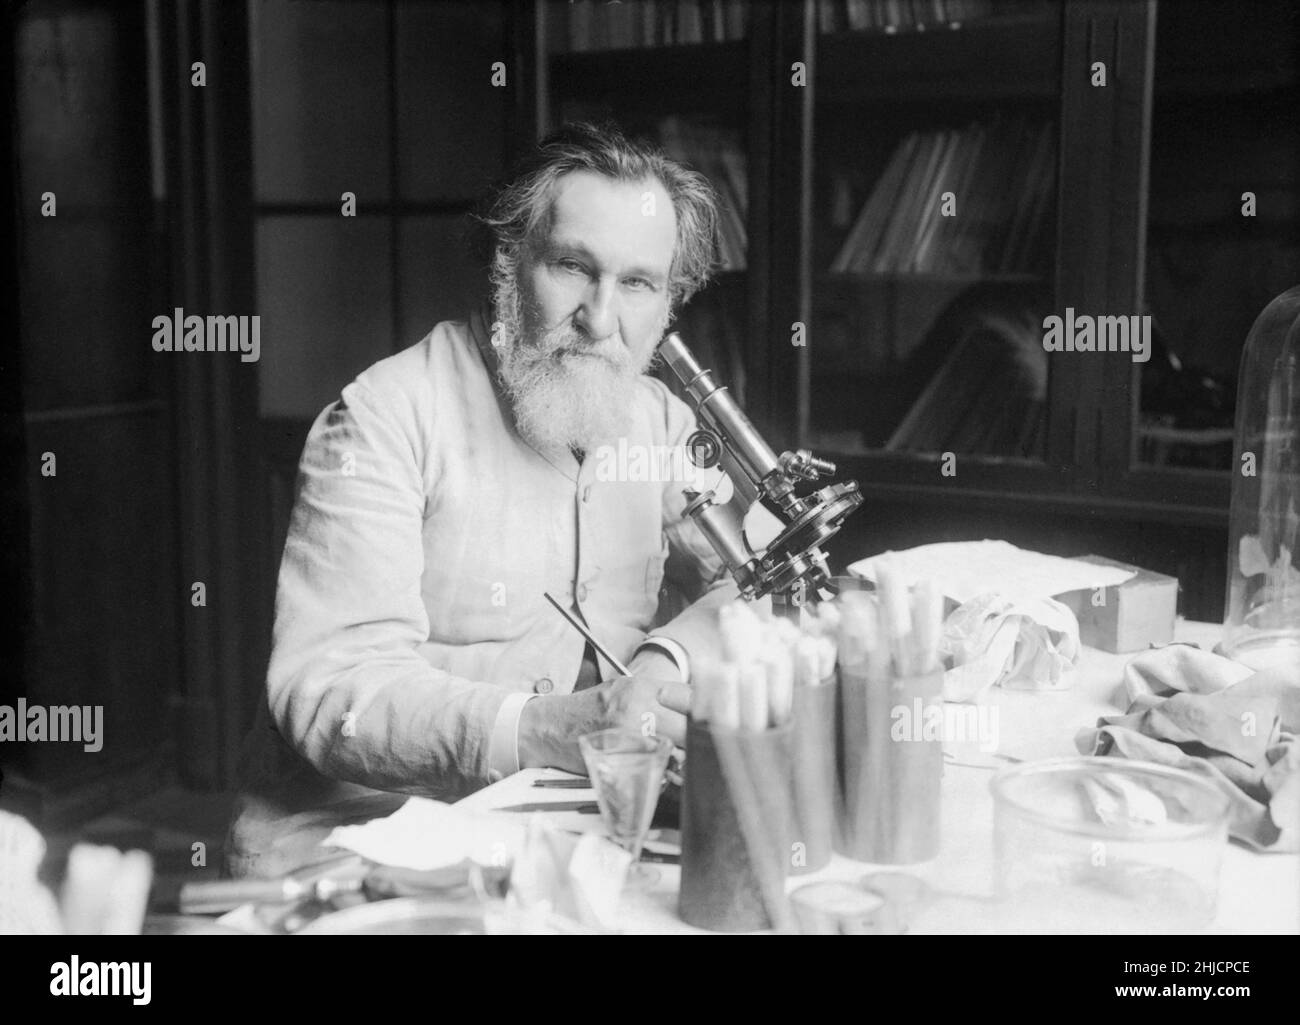 Ilya Ilyich Mechnikov, also known as √âlie Metchnikoff (1845 -1916), Russian zoologist known for his pioneering research in immunology. He and Paul Ehrlich were jointly awarded the 1908 Nobel Prize in Physiology or Medicine. He discovered a process of immunity called phagocytosis and the cell responsible for it, called a phagocyte, specifically the macrophage, in 1882. Photographed in his lab, 1913. Stock Photo